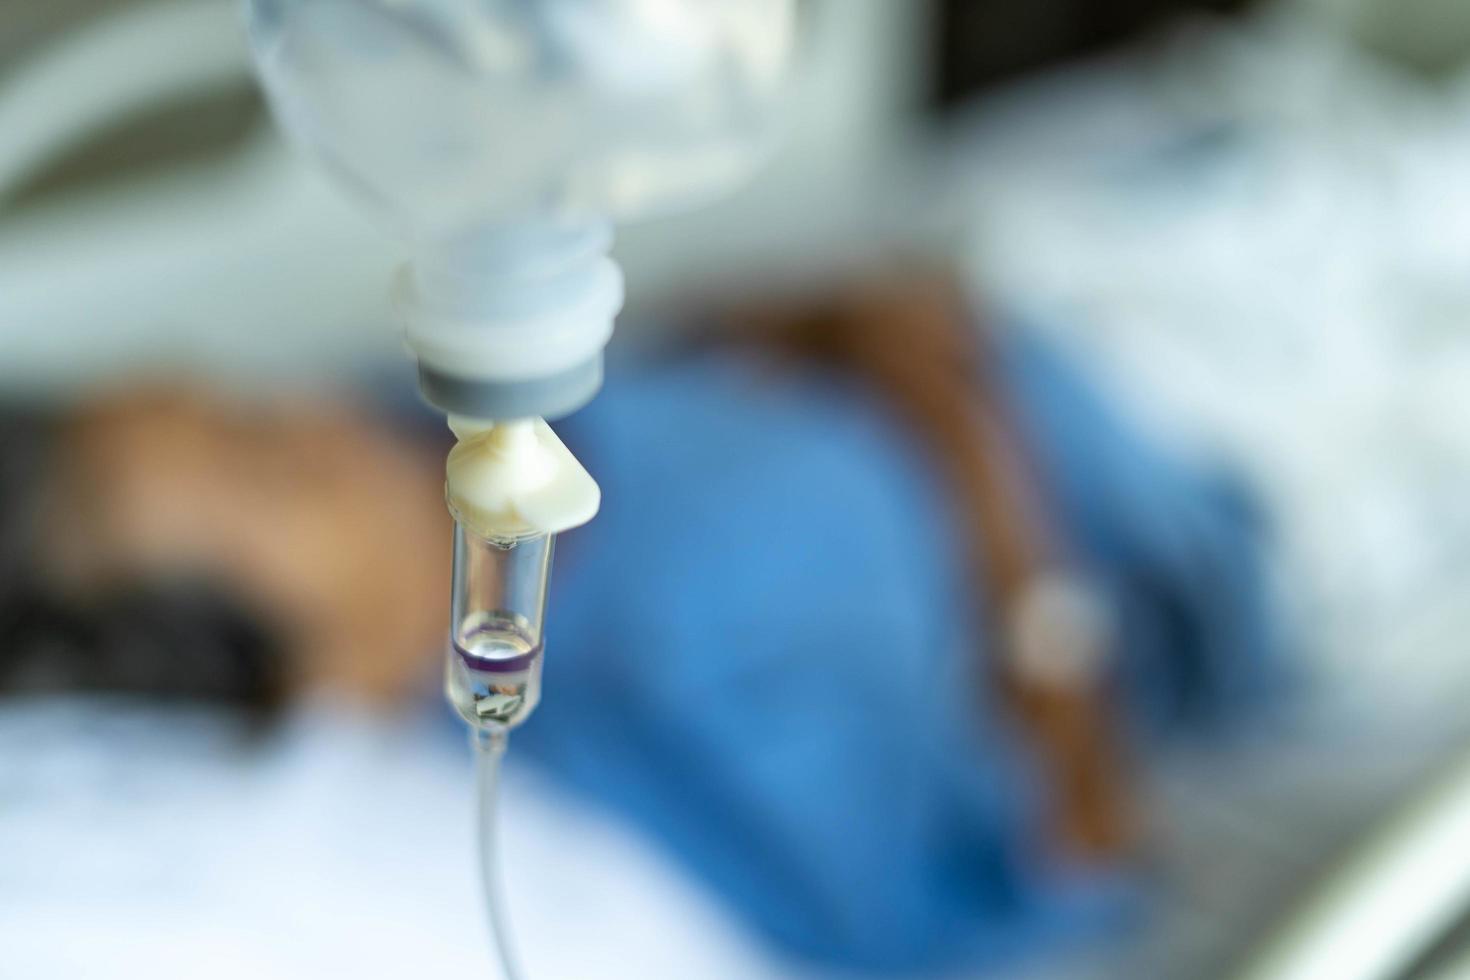 A close-up of a saline bottle strapped to a needle pricked at the hand of a female patient lying in a hospital bed. Medical and treatment of patients concepts photo